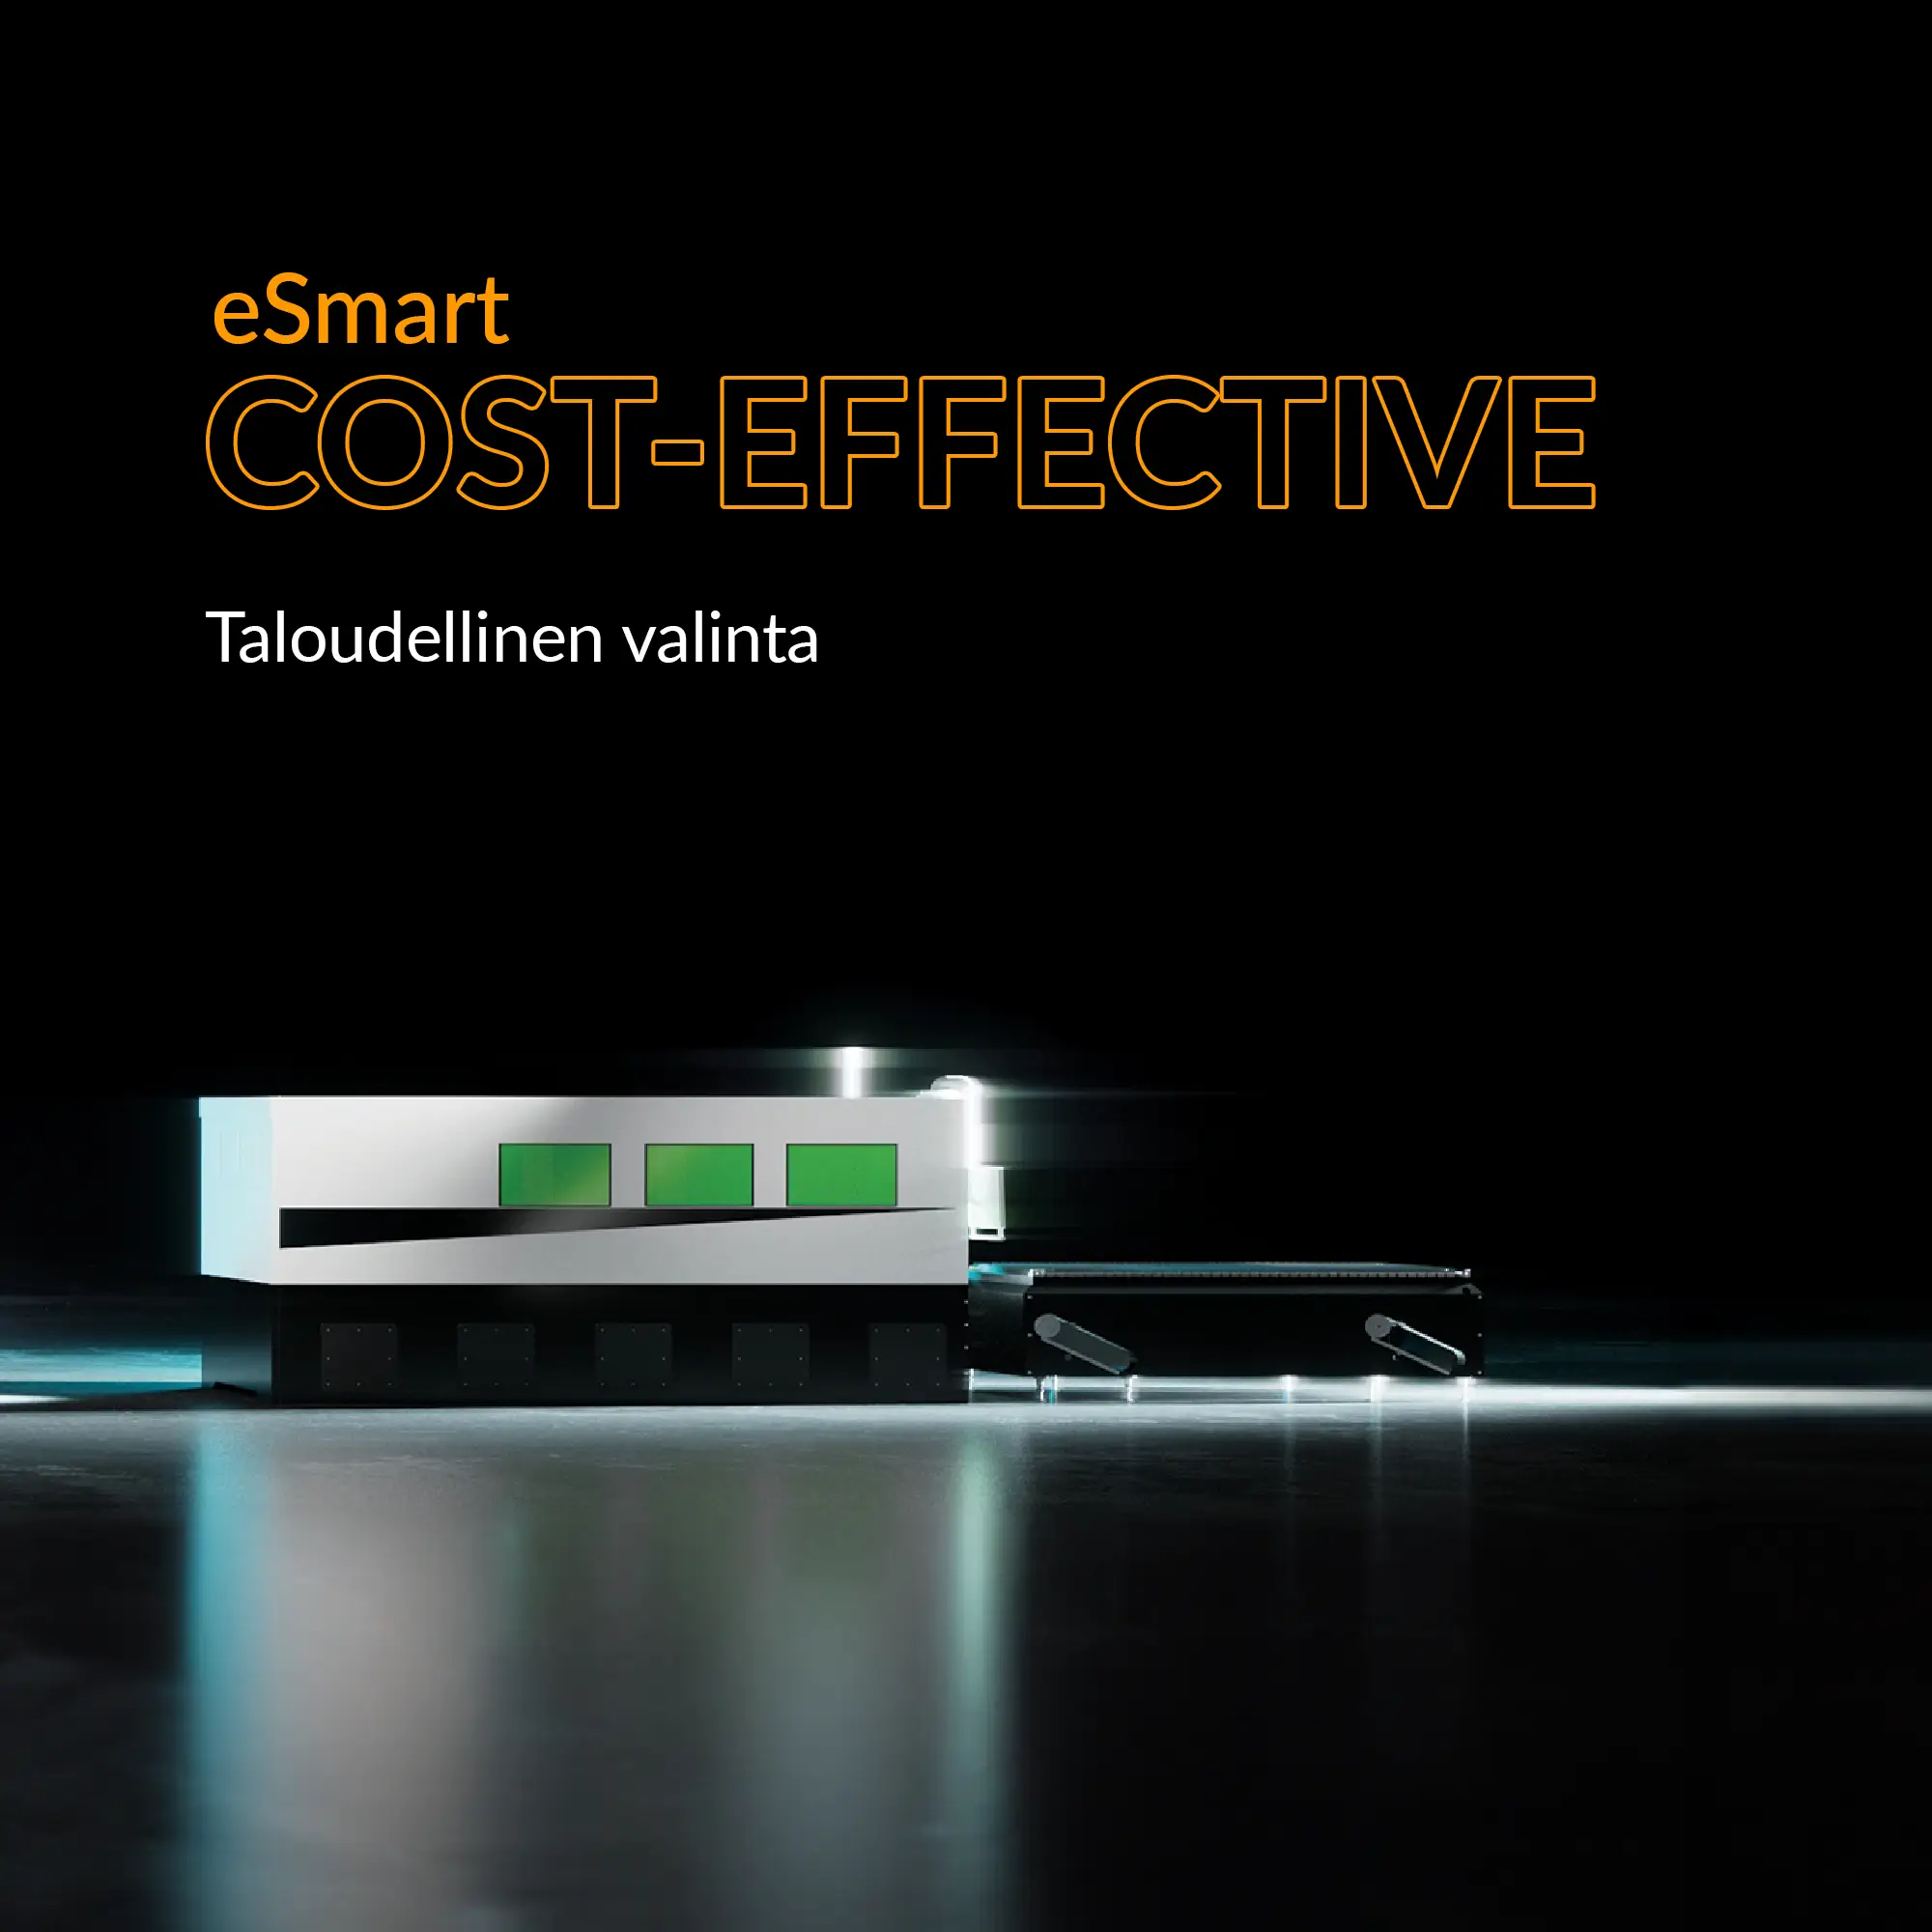 eSmart Cost-Effective for budget-friendly reliability